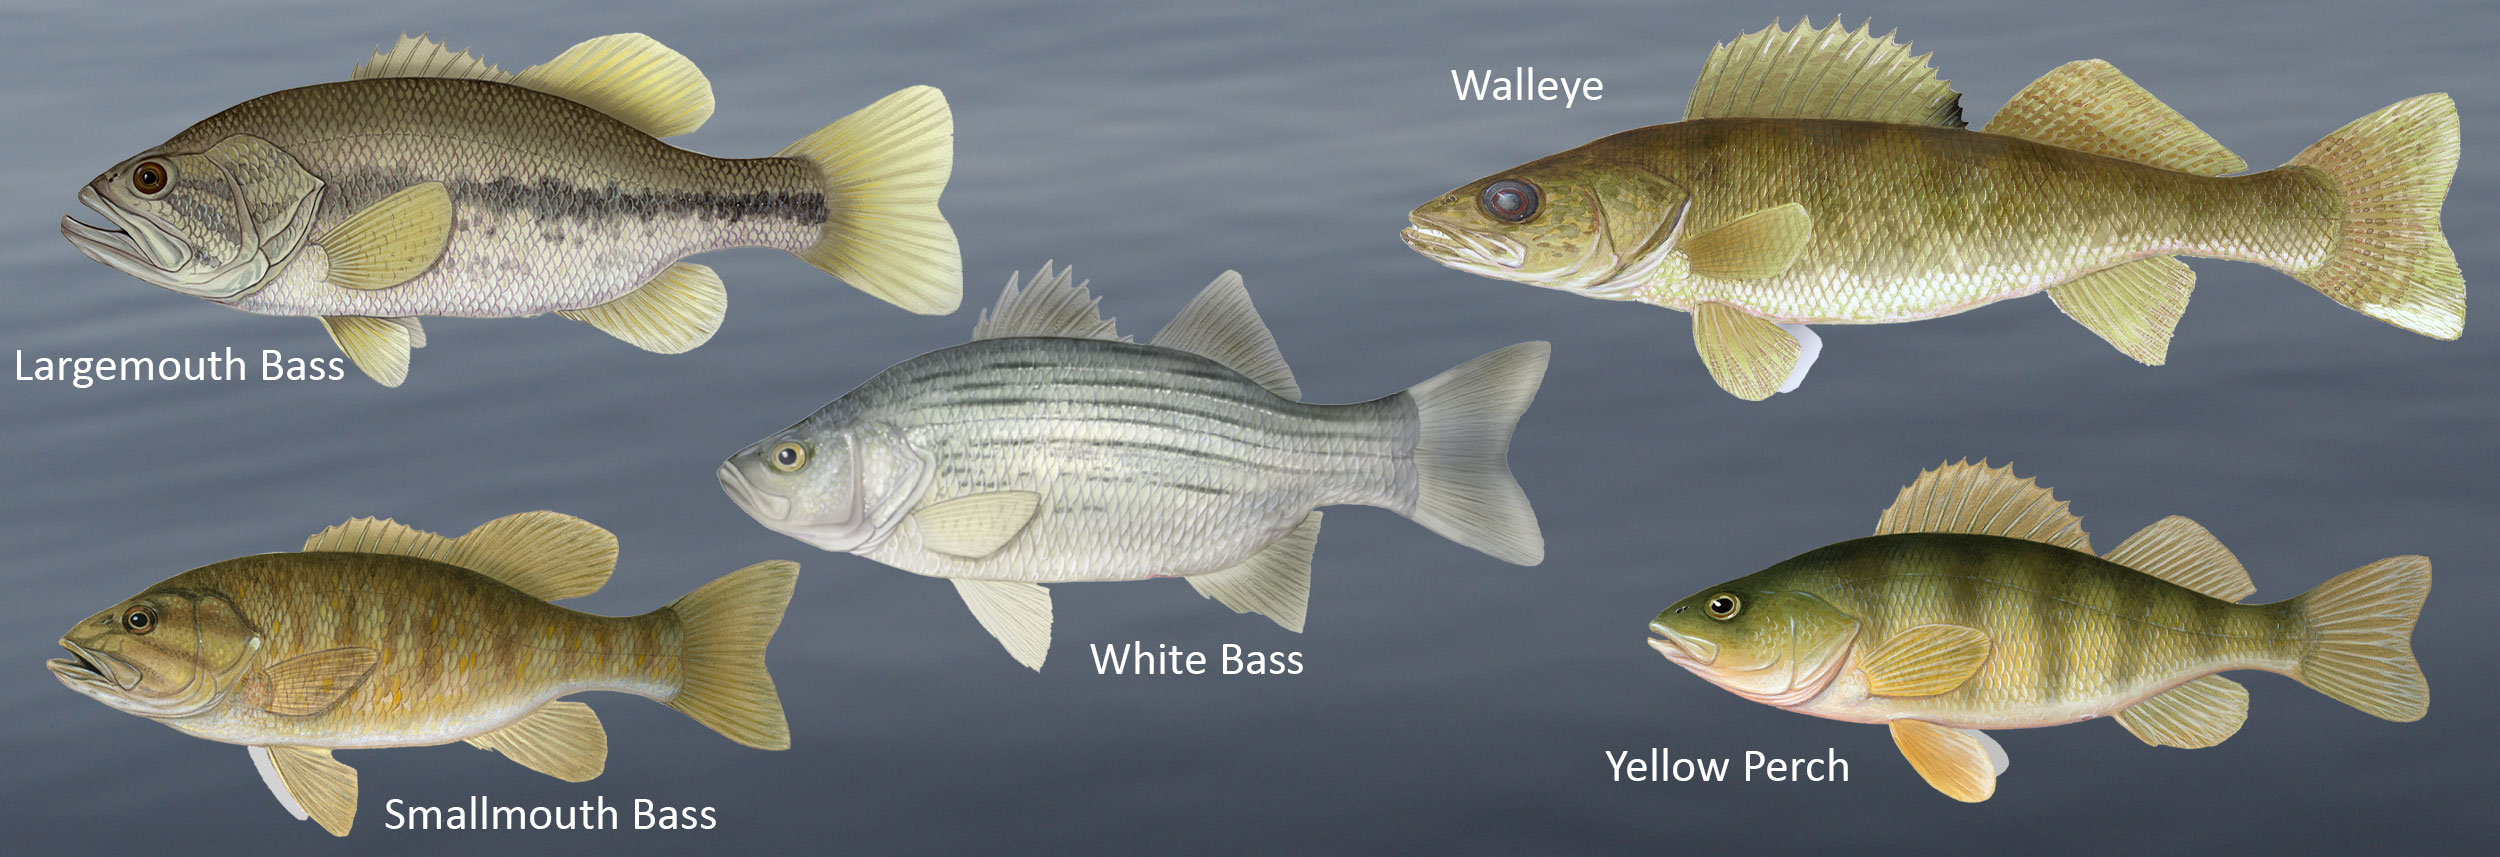 Fish very susceptible to barotrauma - largemouth bass (top left), smallmouth bass (bottom left), white bass (middle), walleye (top right), yellow perch (bottom right)